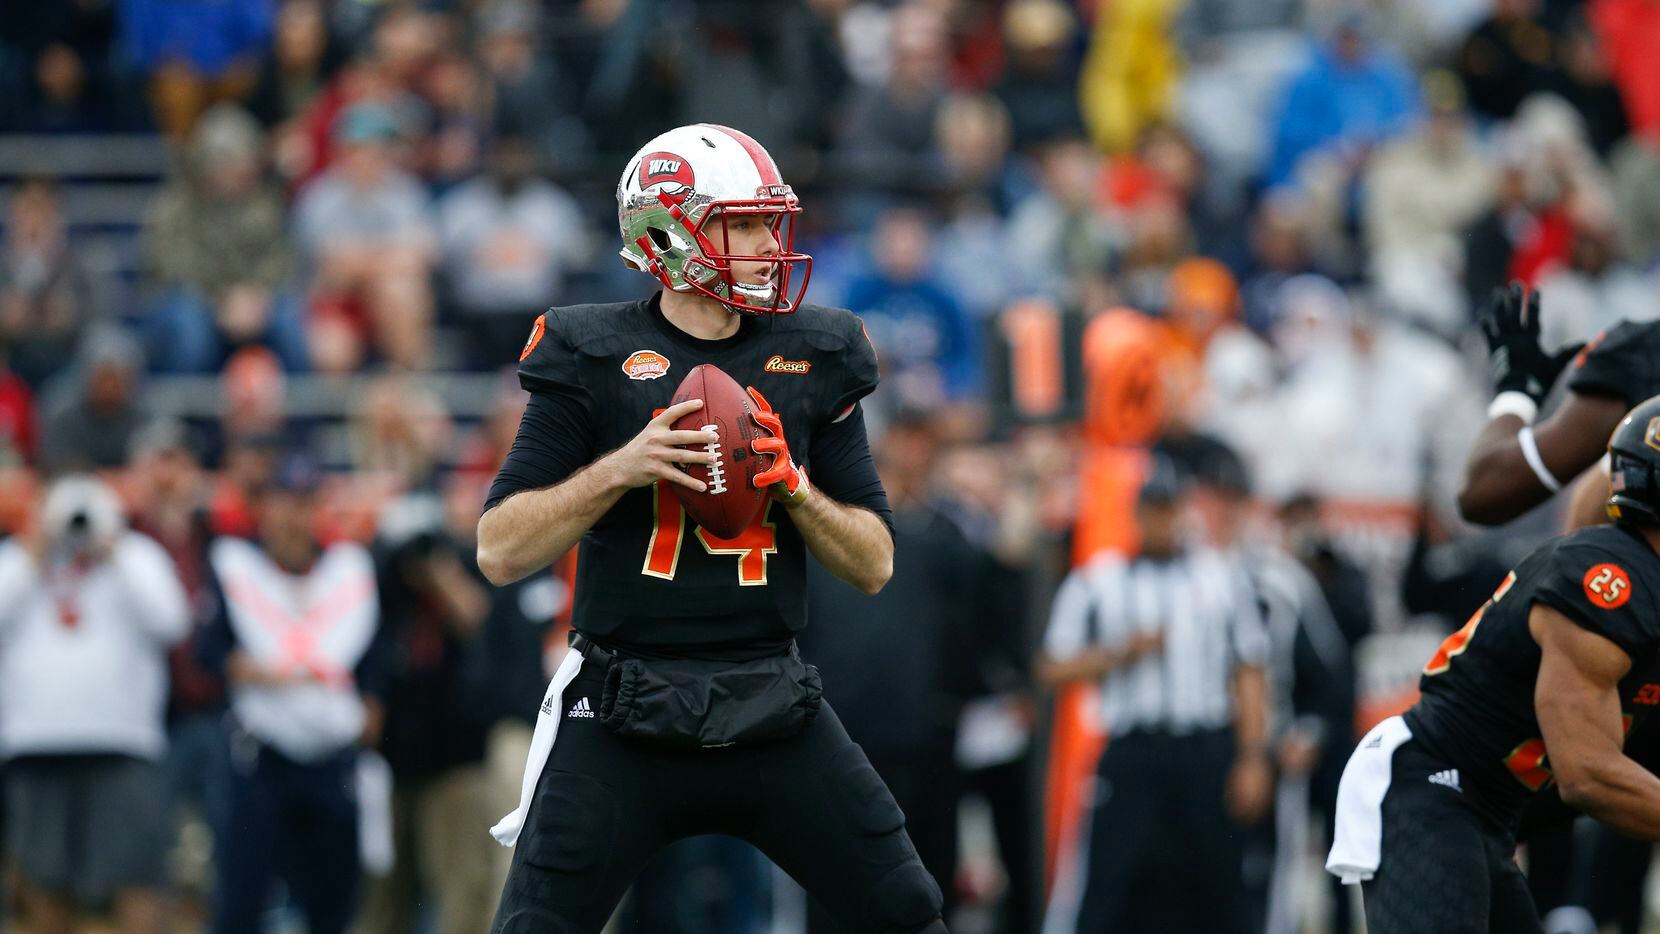 South Squad quarterback Mike White of Western Kentucky (14) during the first half of the...